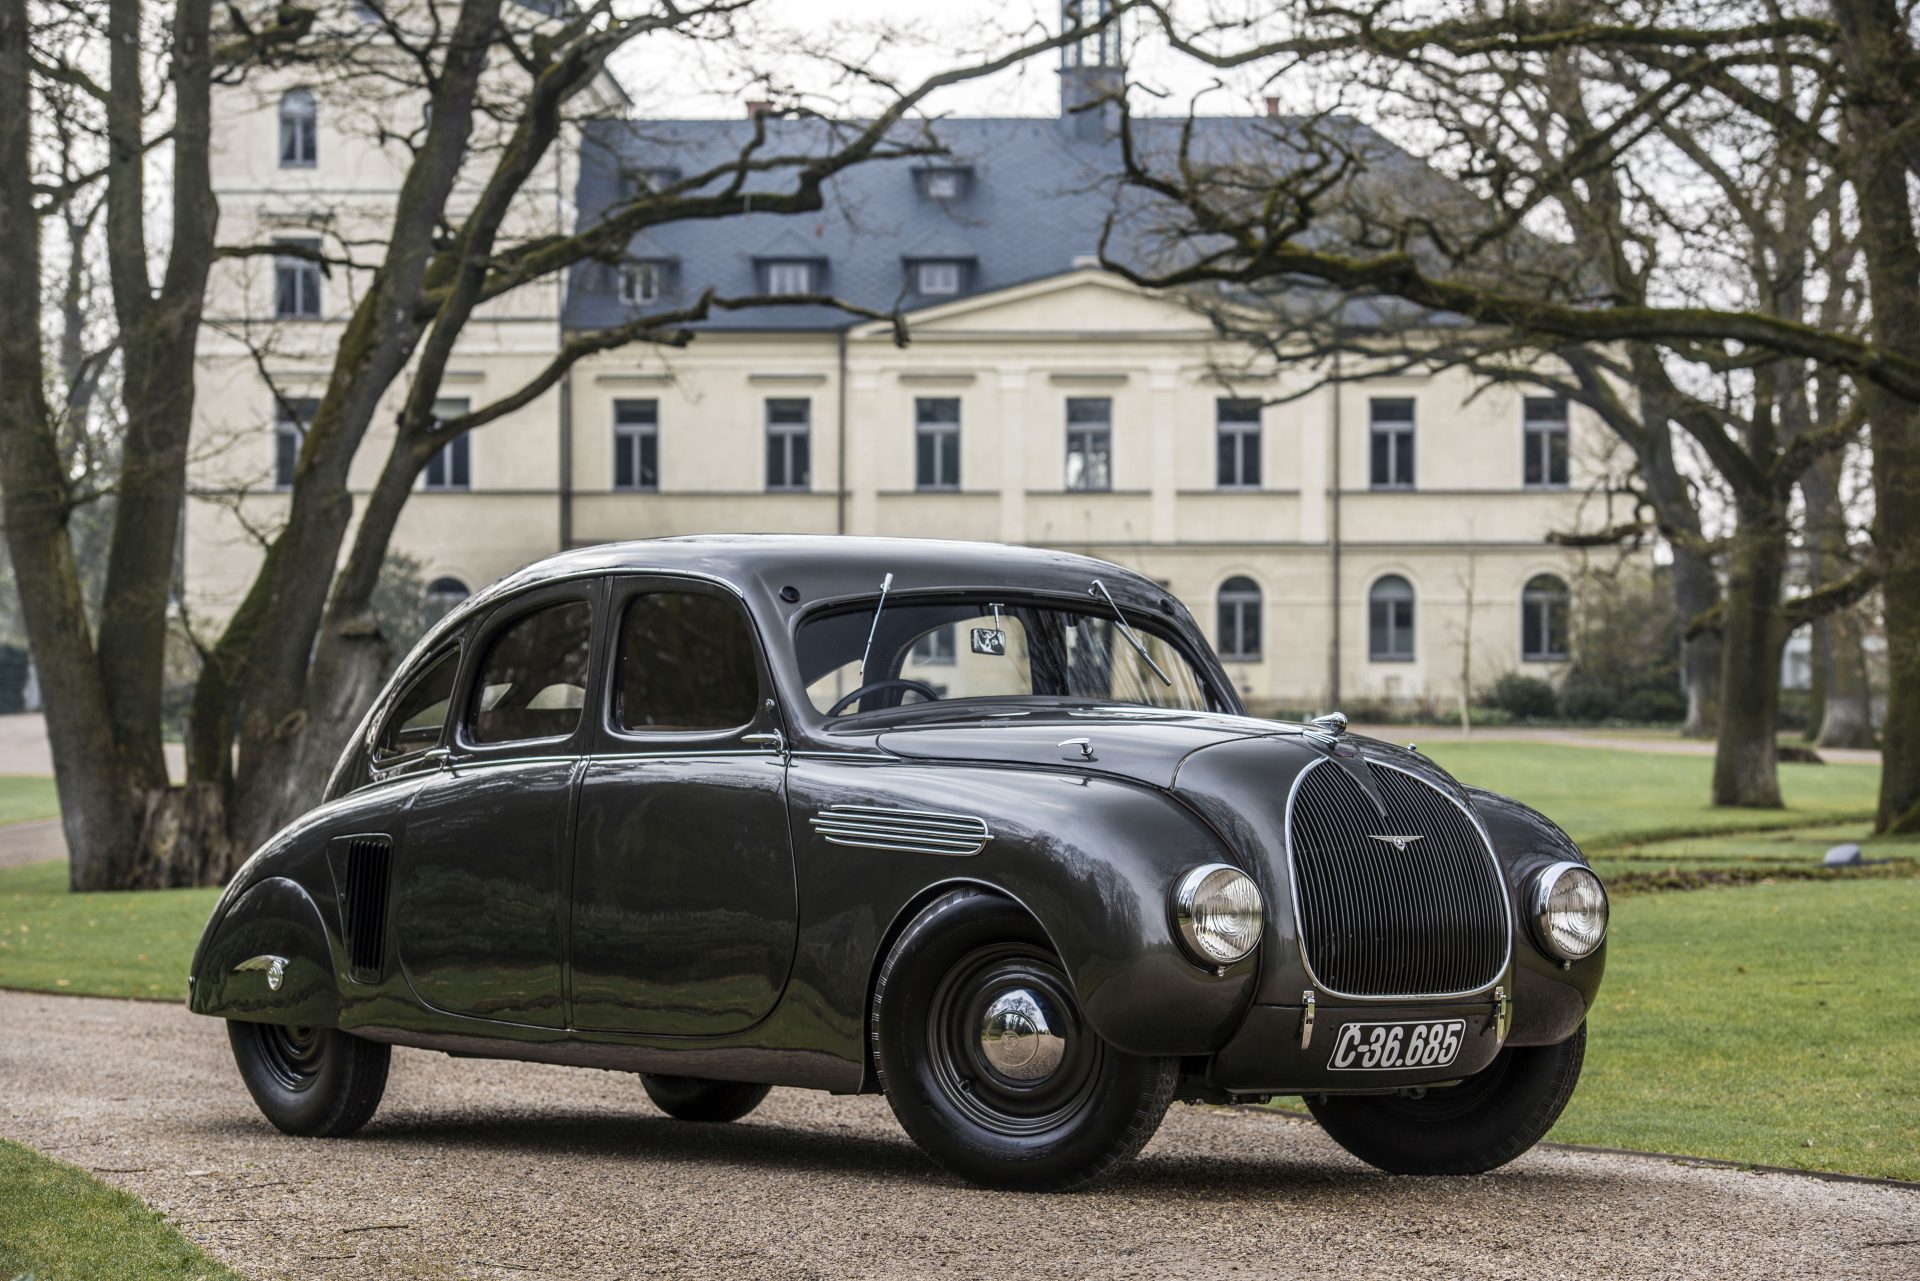 After Being Painstakingly Restored, the ŠKODA 935 DYNAMIC Is Now One of the Most Impressive Vehicles in the ŠKODA Museum’s Collection in Mladá Boleslav